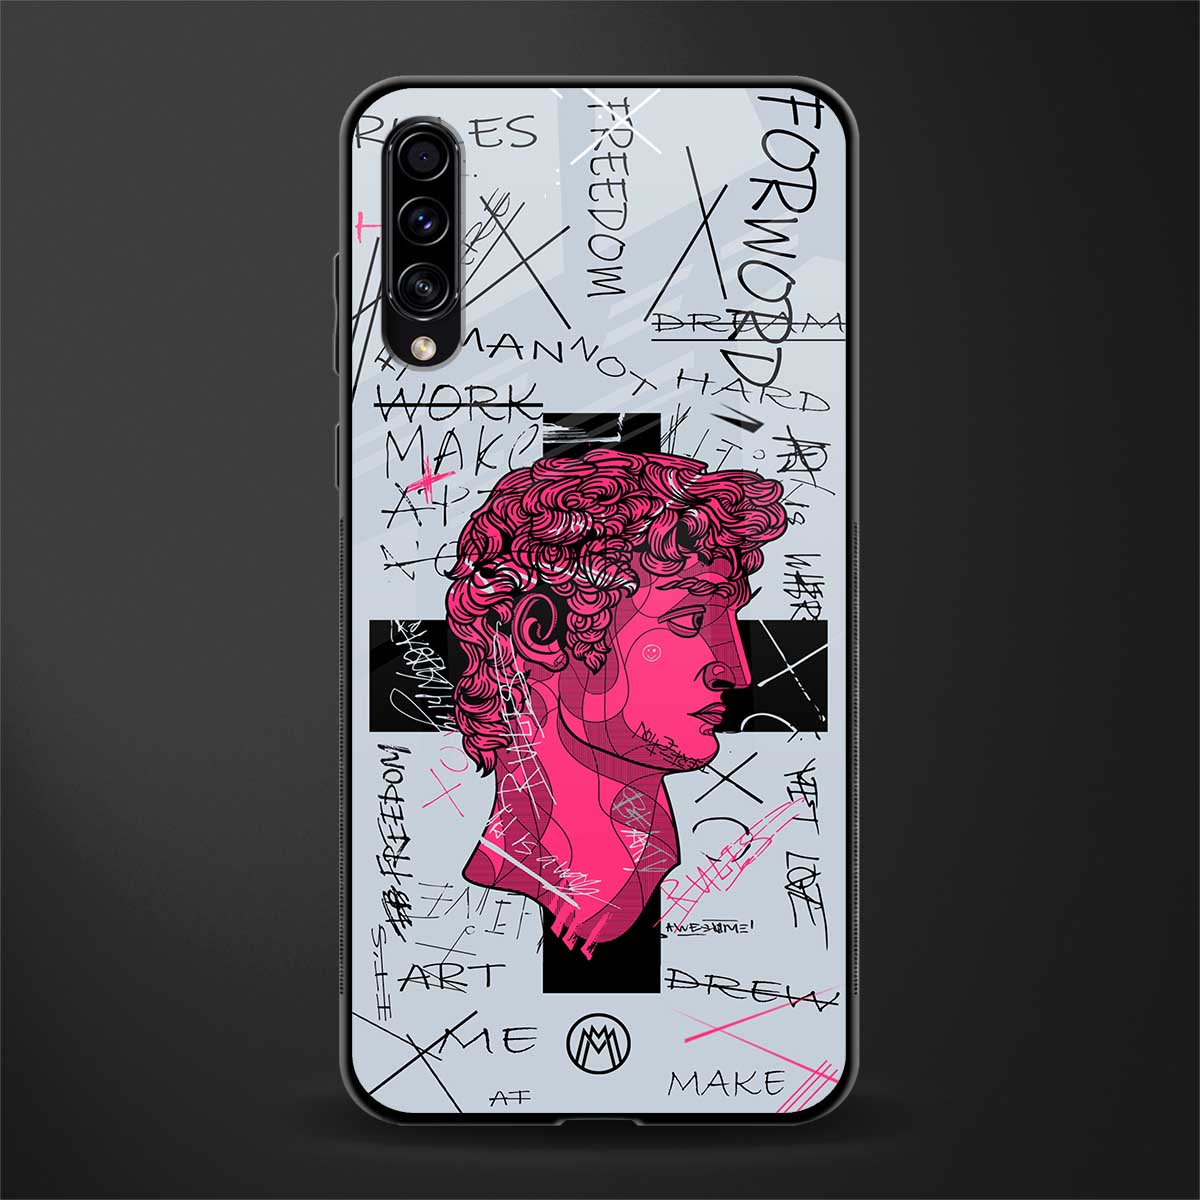 lost in reality david glass case for samsung galaxy a70s image